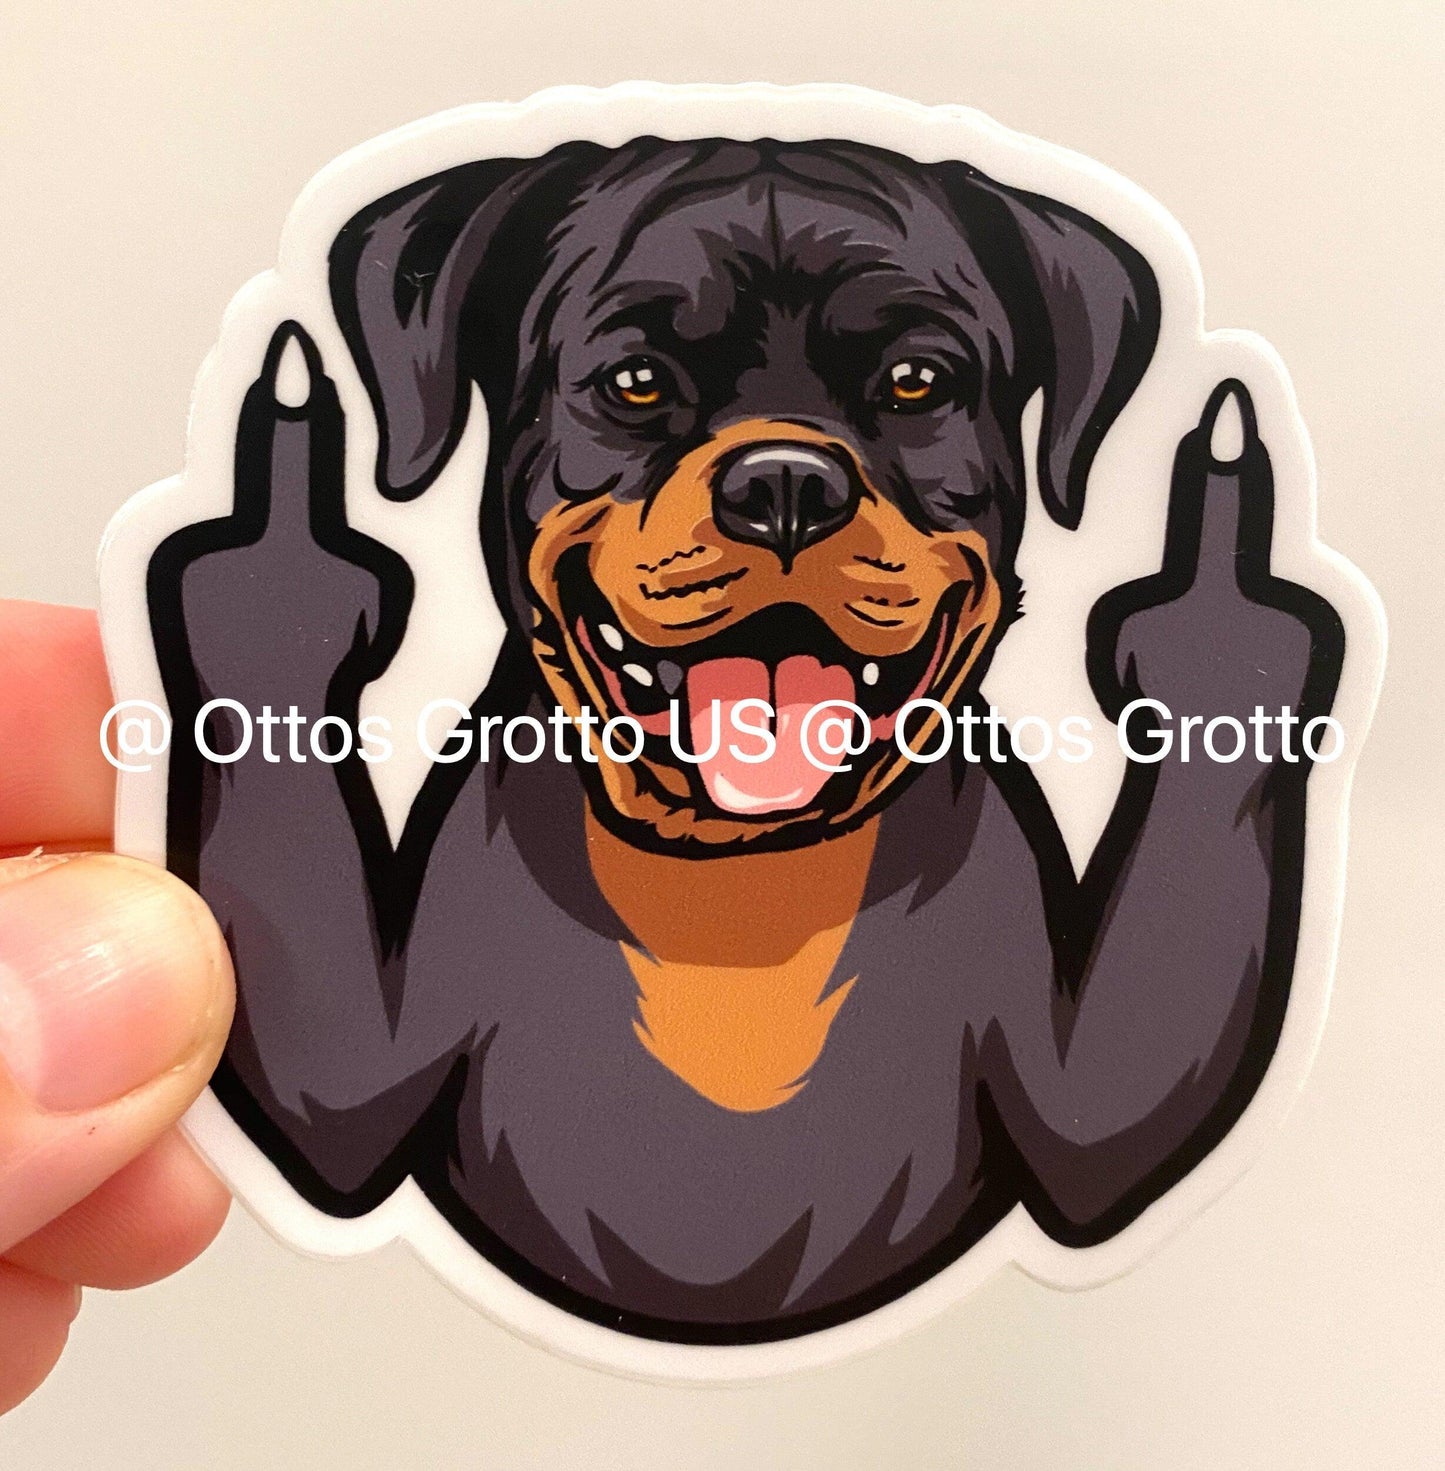 Rottweiler Sticker, Rottweiler Decal, Rottweiler Middle Finger Sticker for Rottie Owners, Funny Rottweiler Gift, Rottweiler Car Decal - Ottos Grotto :: Stickers For Your Stuff